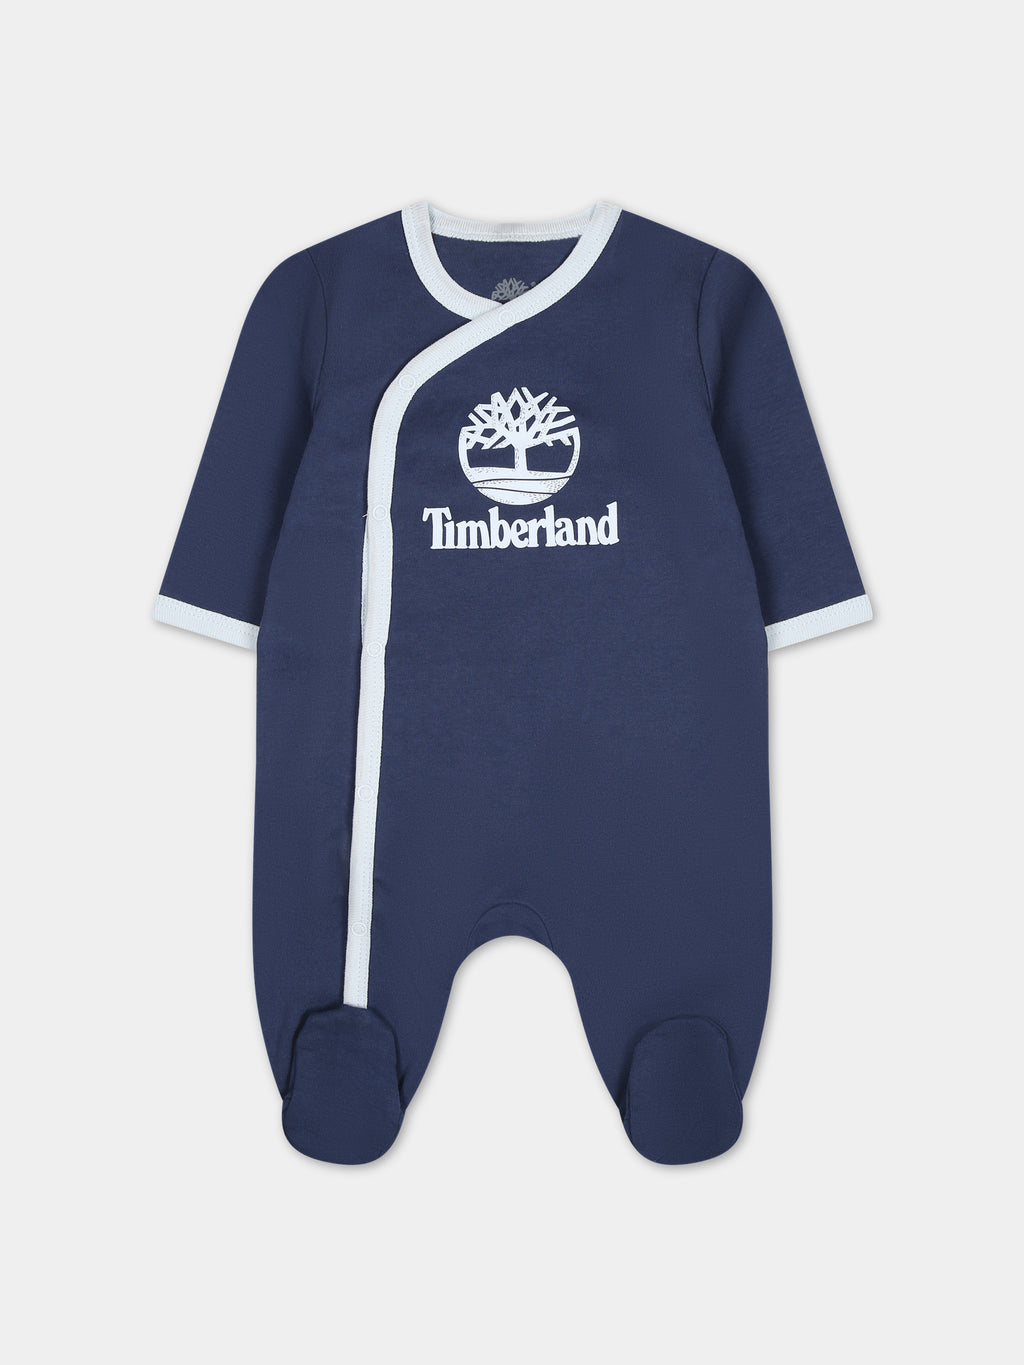 Blue jumpsuit for baby boy with logo